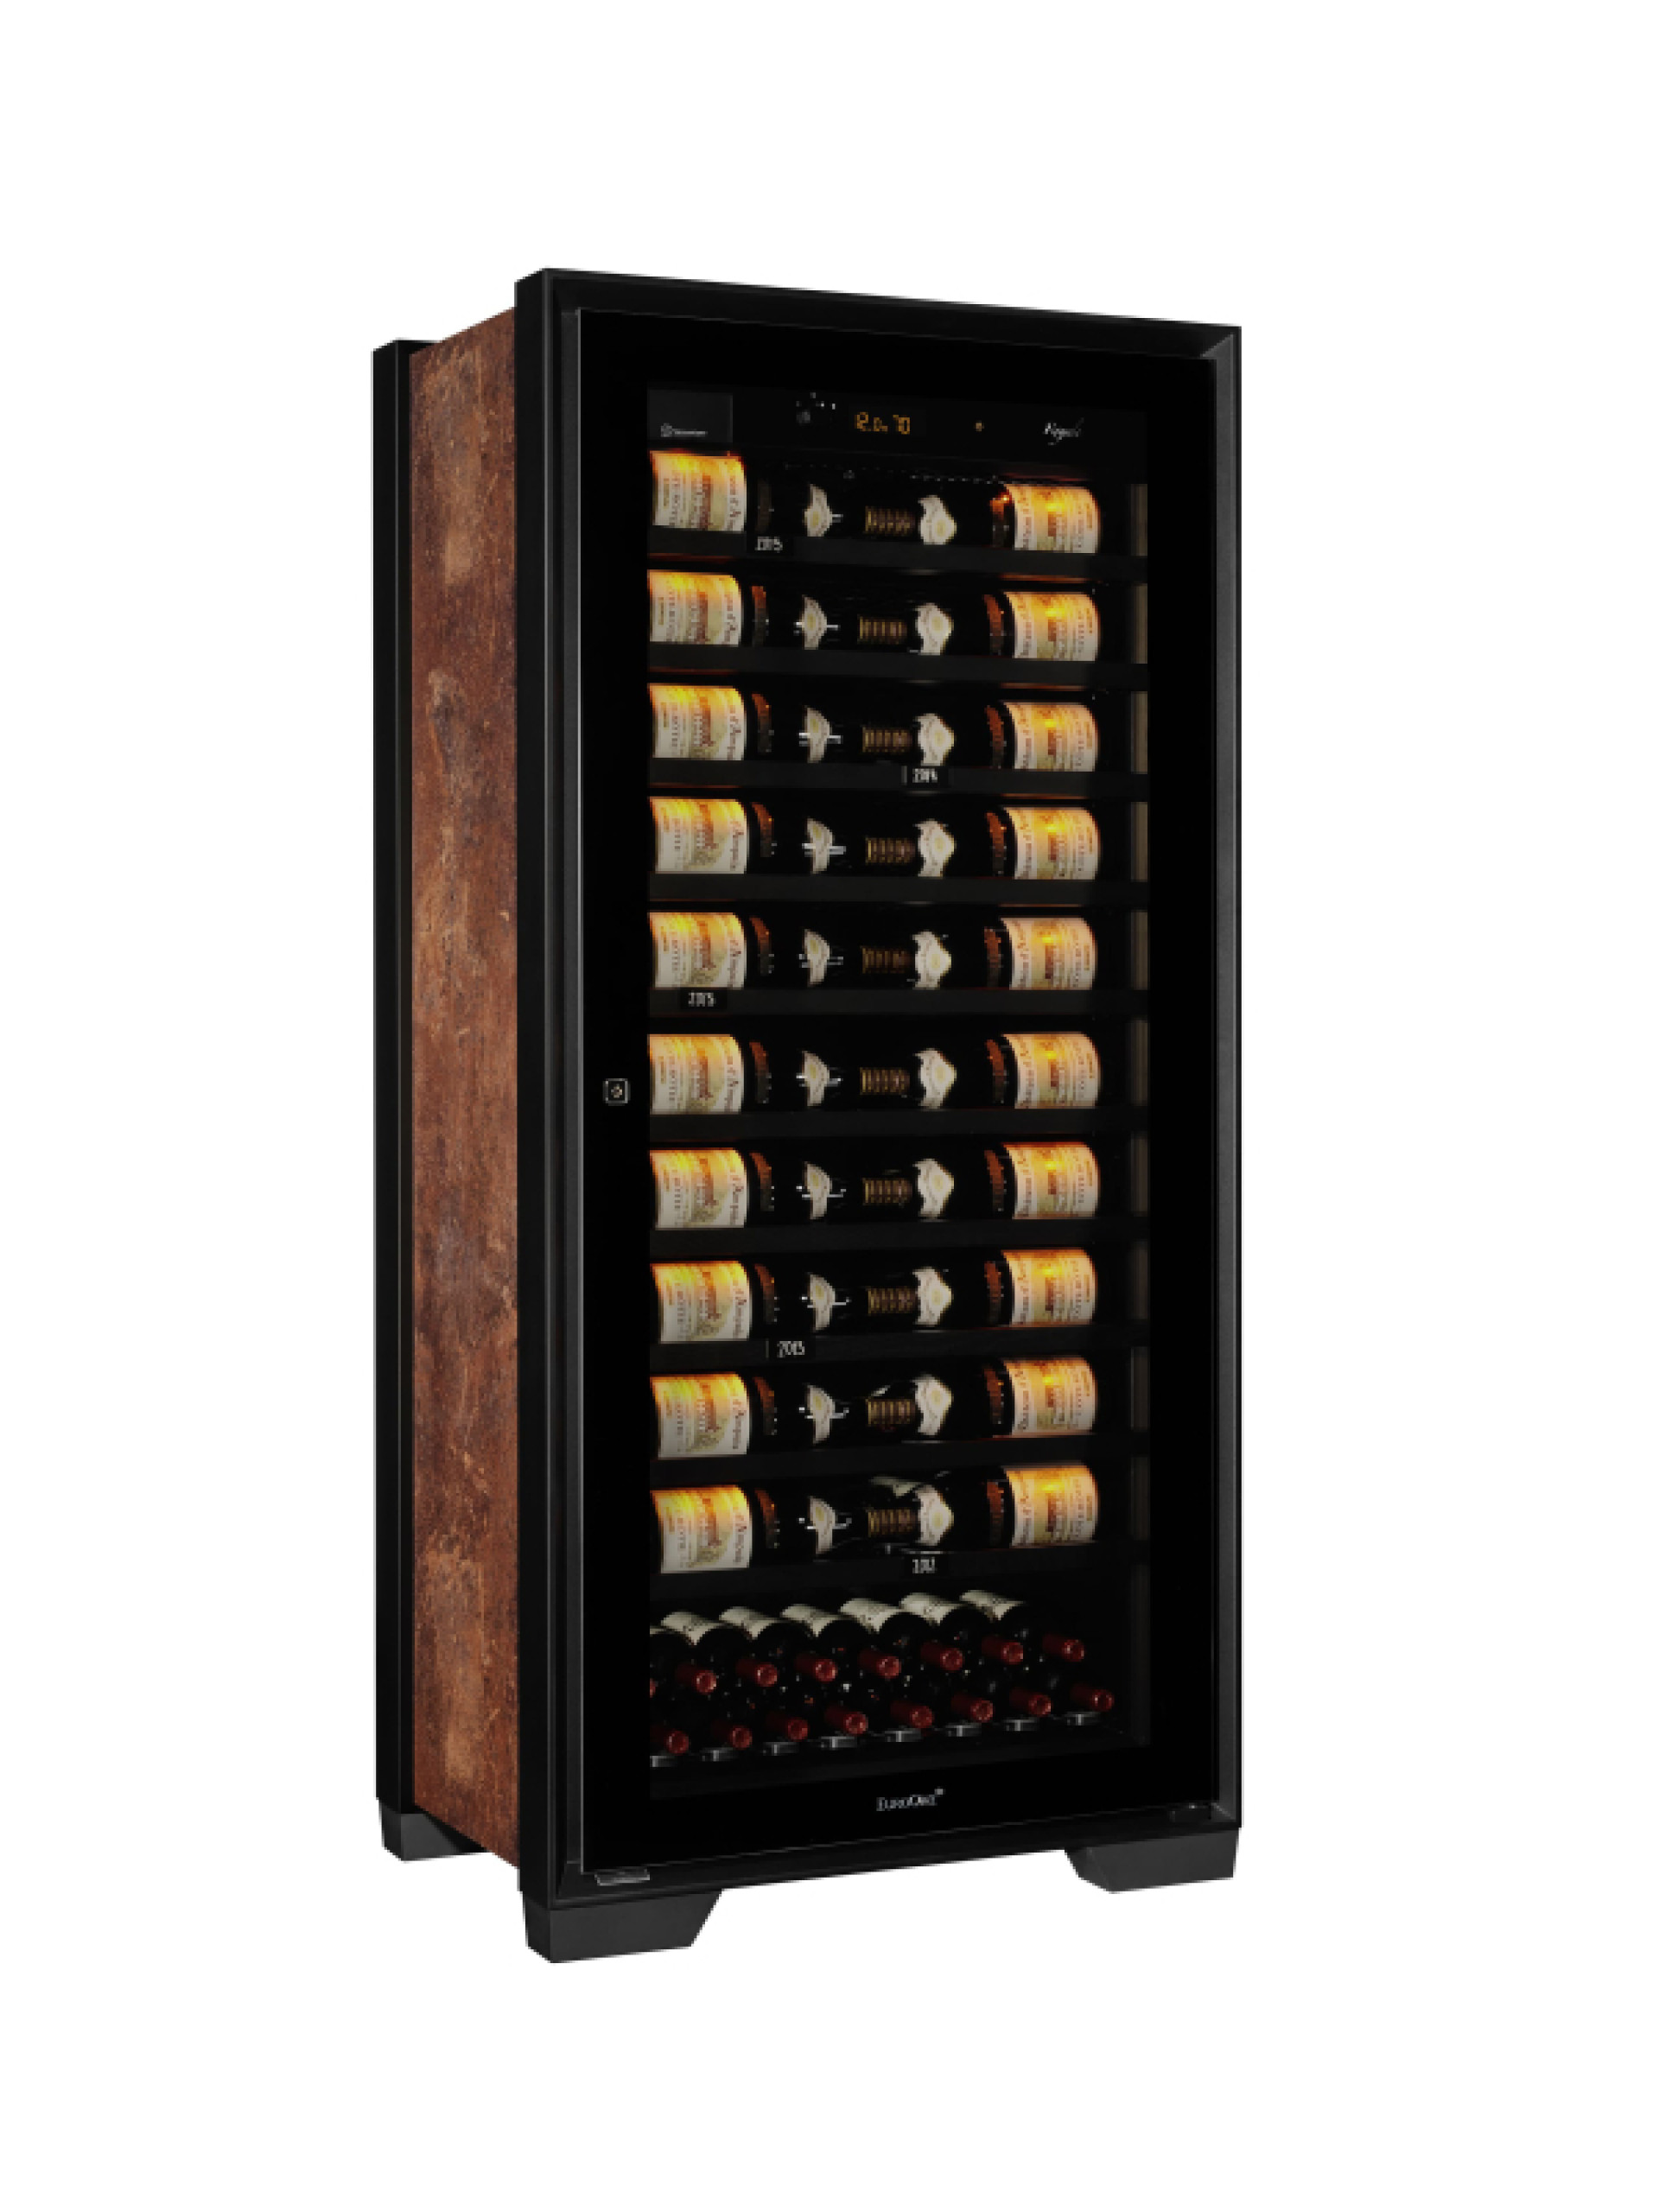 The best aging wine cellar in the world is an exceptional product due to its performance, the quality of the materials used and its luxury design. - Royale EuroCave